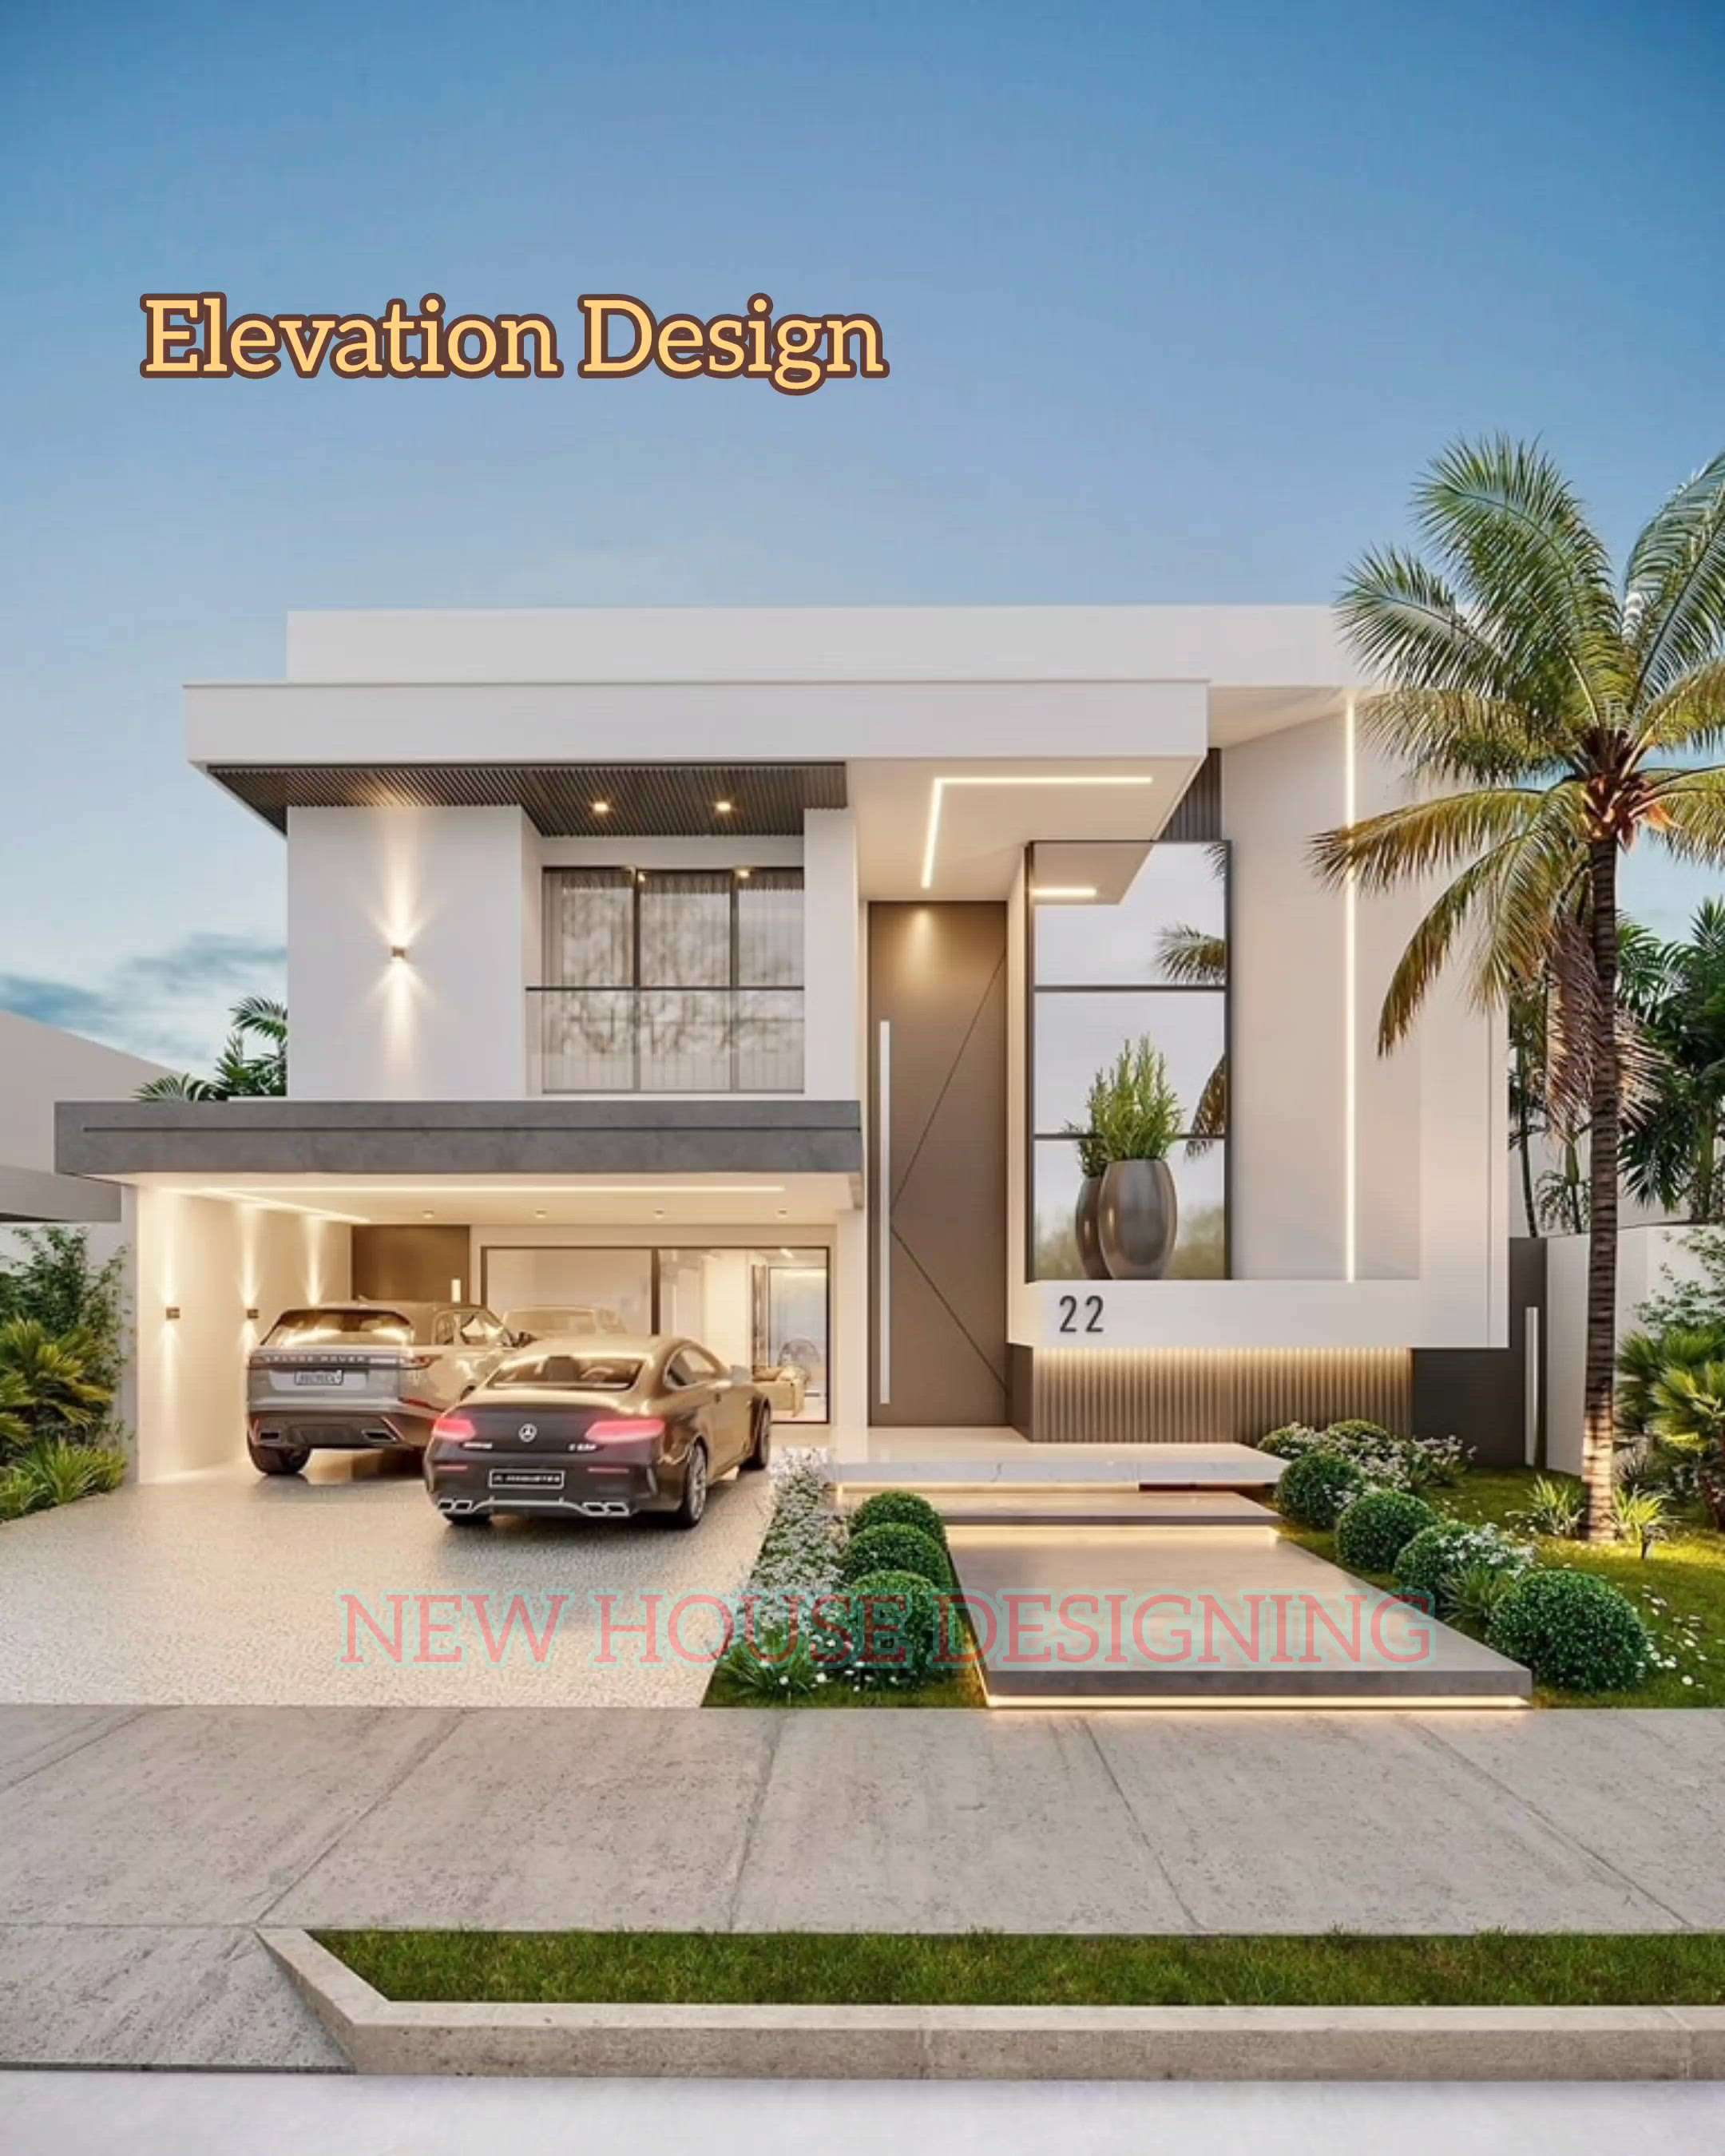 Elevation Design..Call Now For House Designing..7877377579

#elevation #architecture #design #interiordesign #construction #elevationdesign #architect #love #interior #d #exteriordesign #motivation #art #architecturedesign #civilengineering #u #autocad #growth #interiordesigner #elevations #drawing #frontelevation #architecturelovers #home #facade #revit #vray #homedecor #selflove #instagood
#designer #explore #civil #dsmax #building #exterior #delevation #inspiration #civilengineer #nature #staircasedesign #explorepage #healing #sketchup #rendering #engineering #architecturephotography #archdaily #empowerment #planning #artist #meditation #decor #housedesign #render #house #lifestyle #life #mountains #buildingelevation
#elevation #explorepage #interiordesign #homedecor #peace #mountains #decor #designer #interior #selflove #selfcare #house #meditation #building #healing #growth #architecturephotography #construction #architecturelovers #interiordesigner #architect